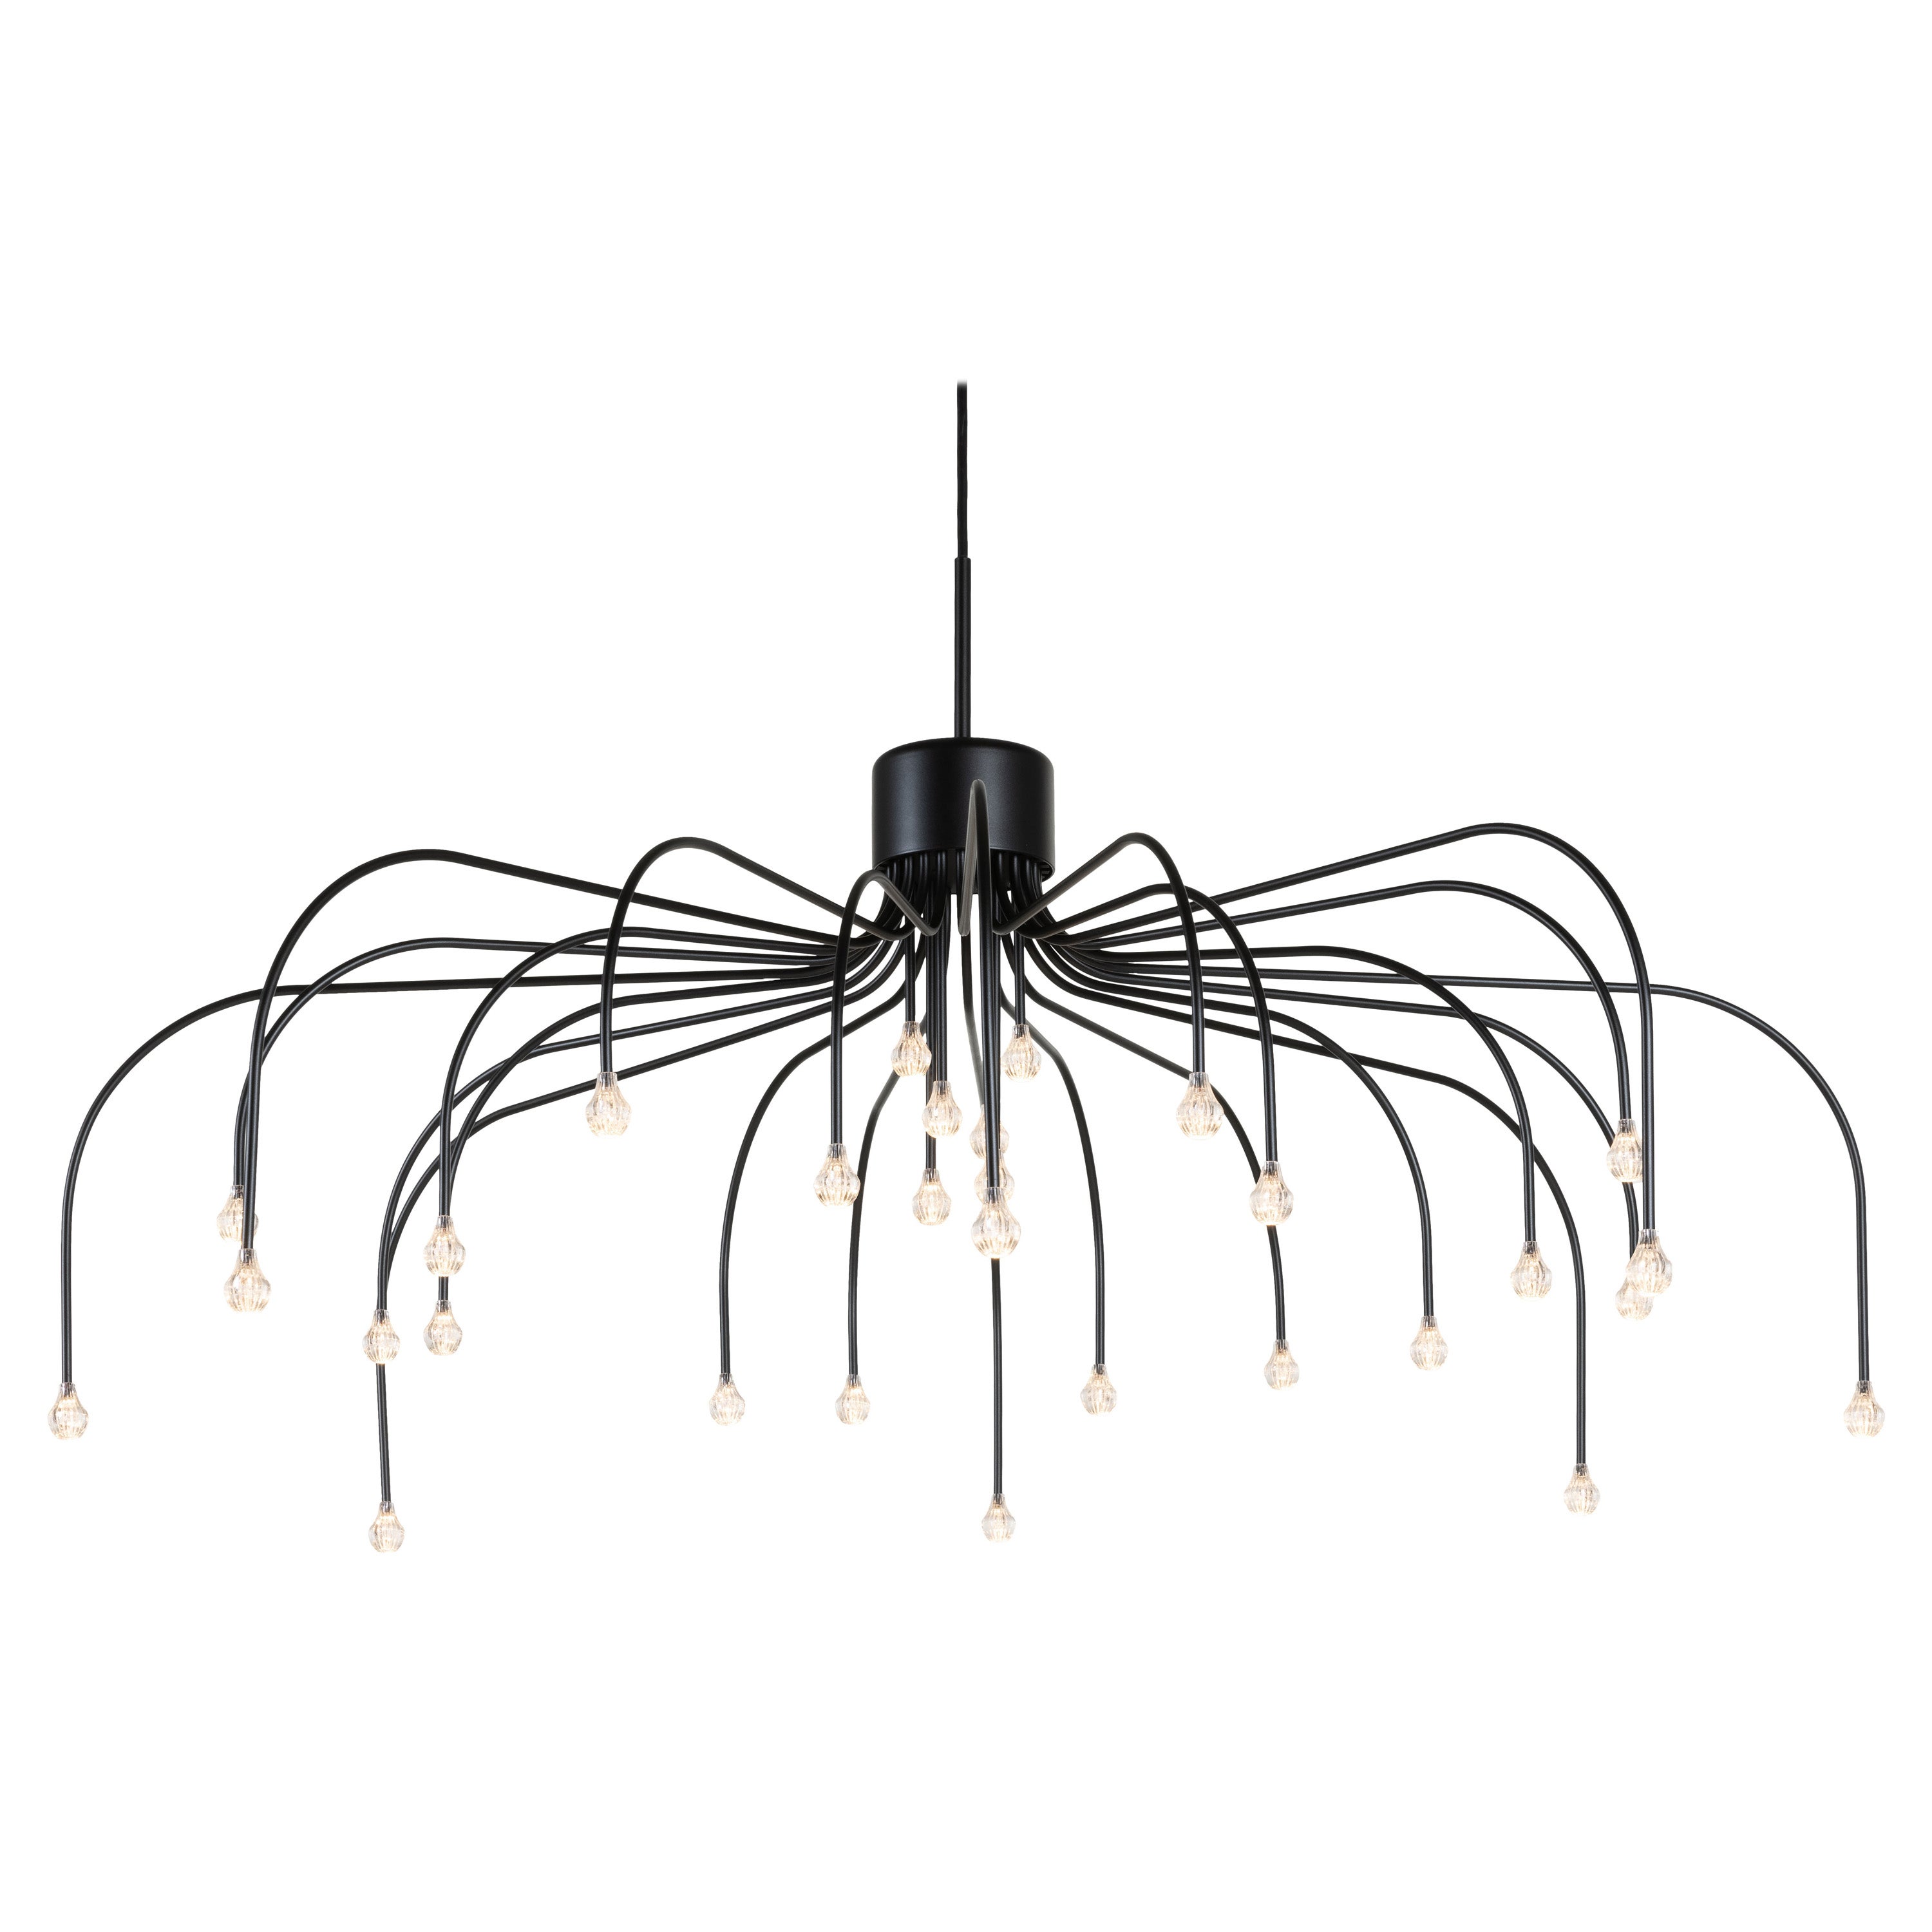 Moooi Starfall Light 30 Circular Suspension Lamp in Black by Front Design